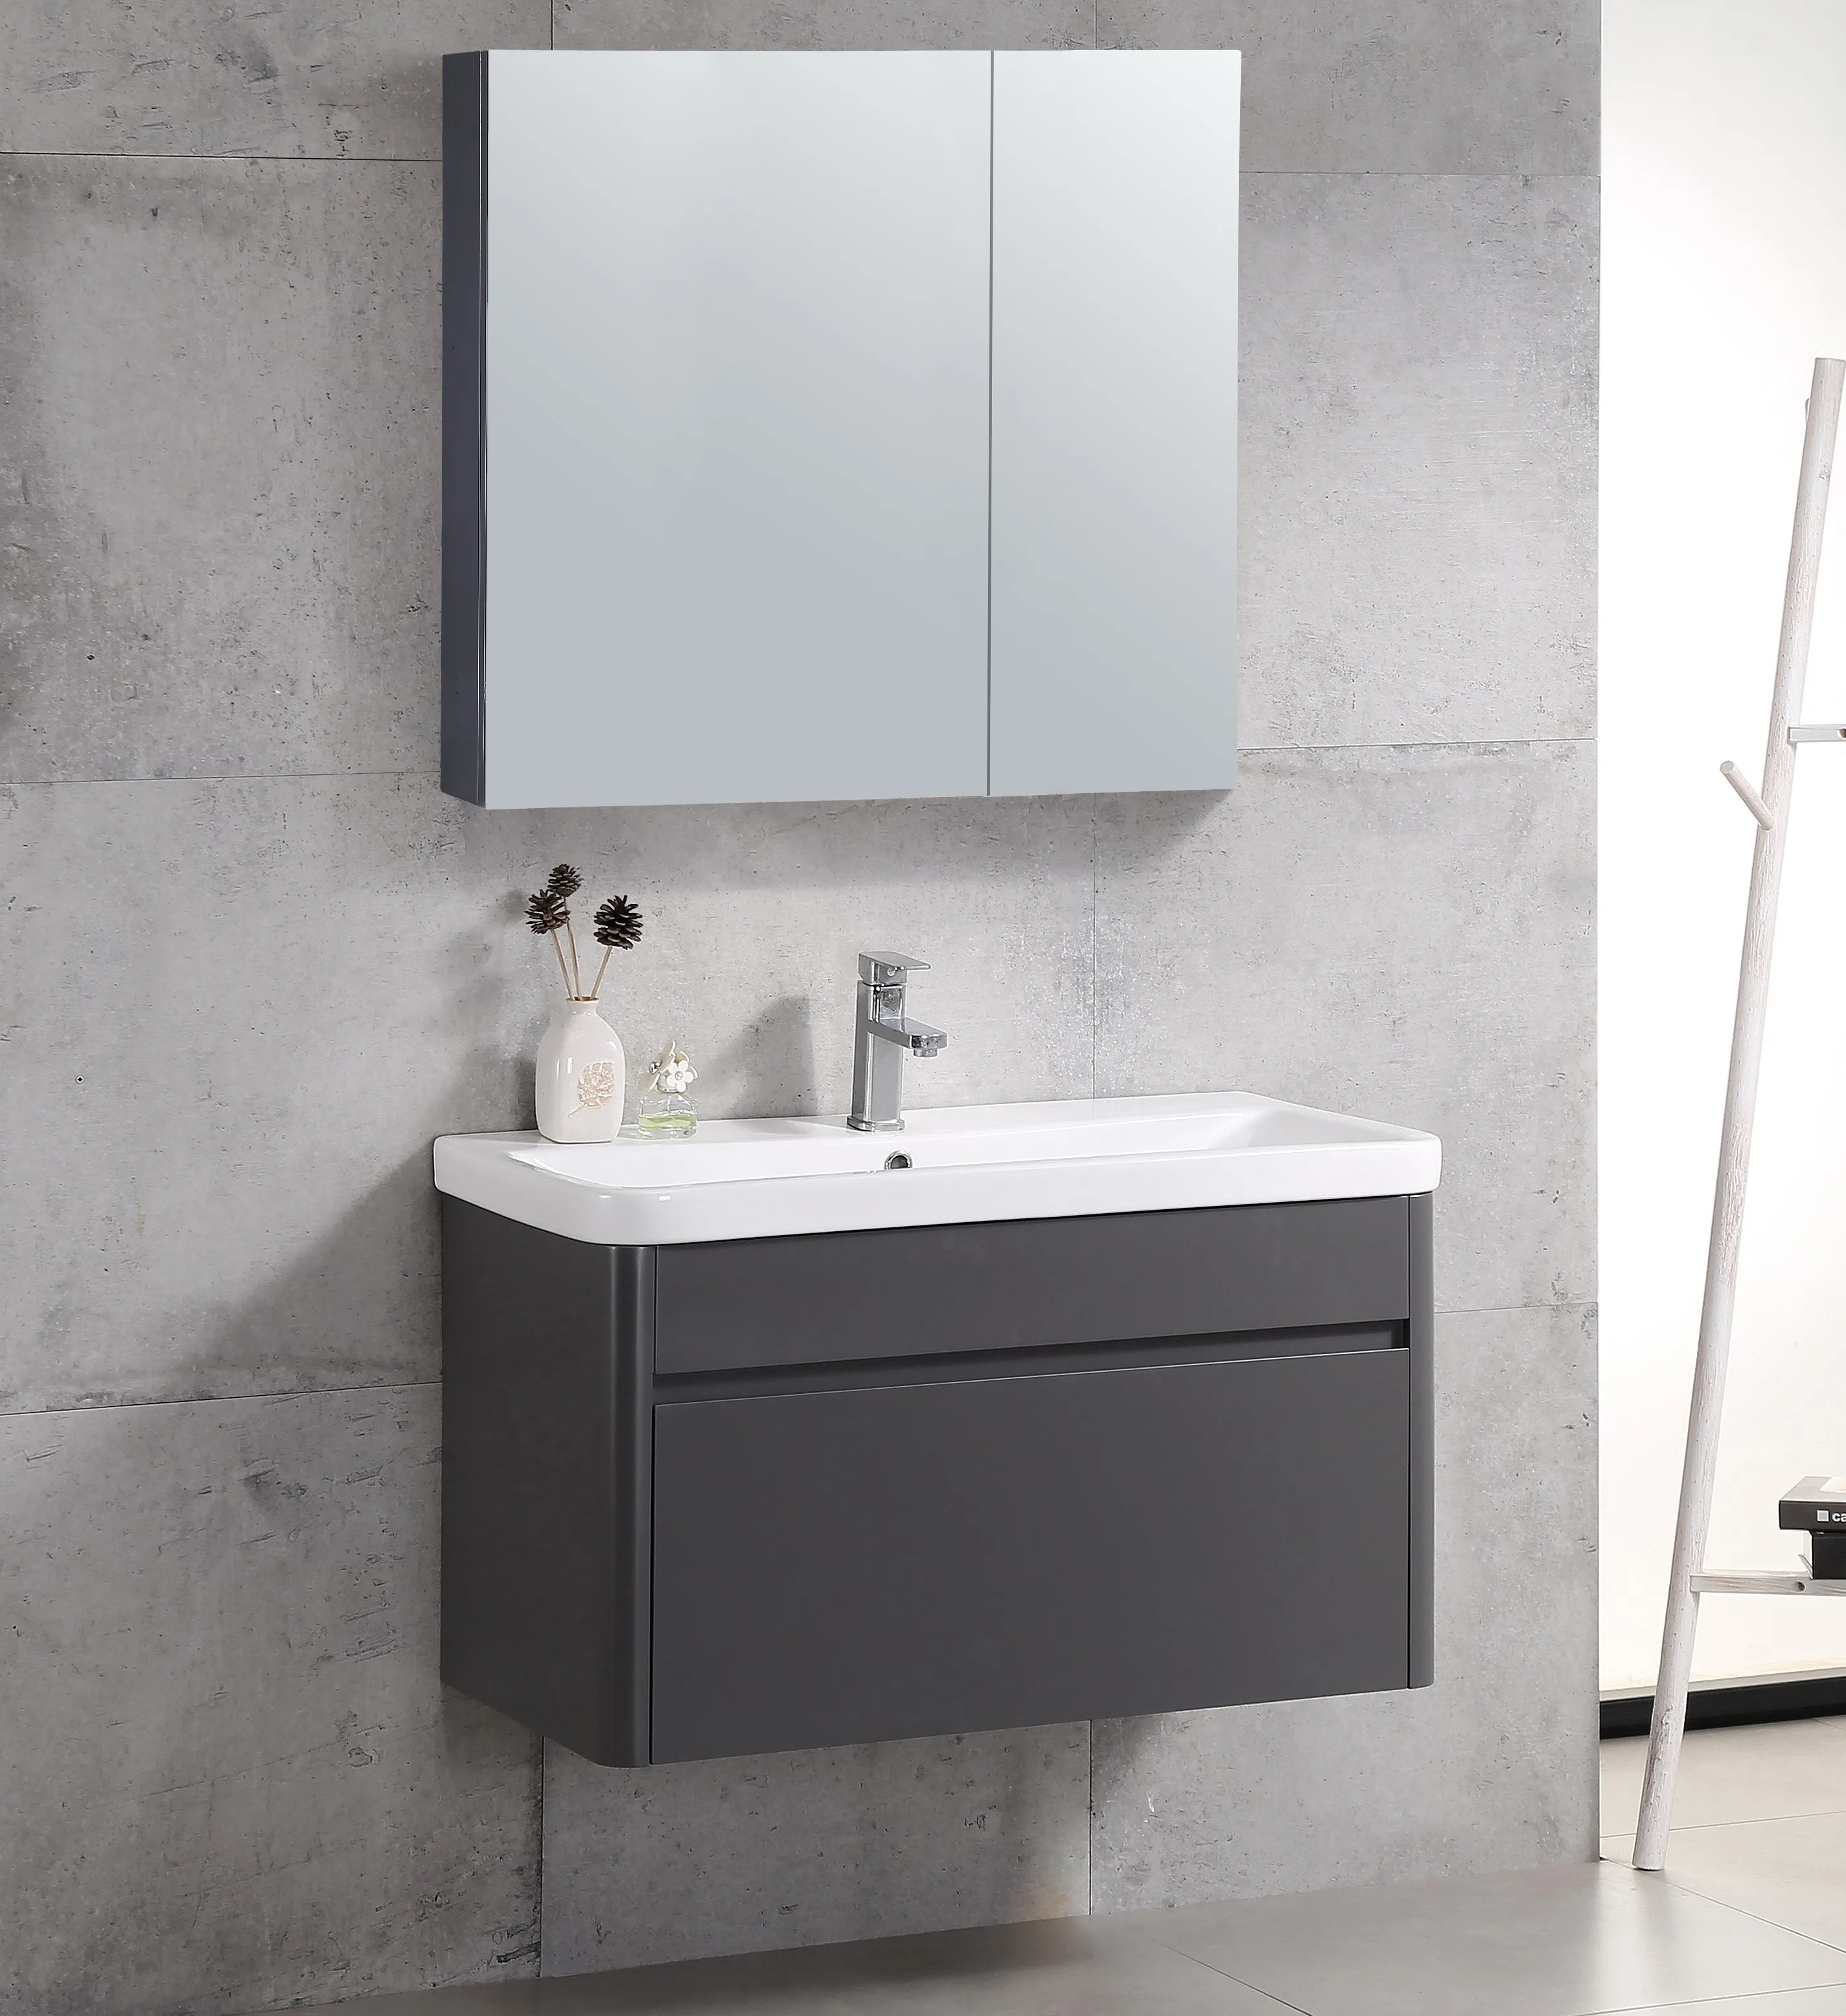 New style grey mirror cabinet concise style square shape pvc one year warranty